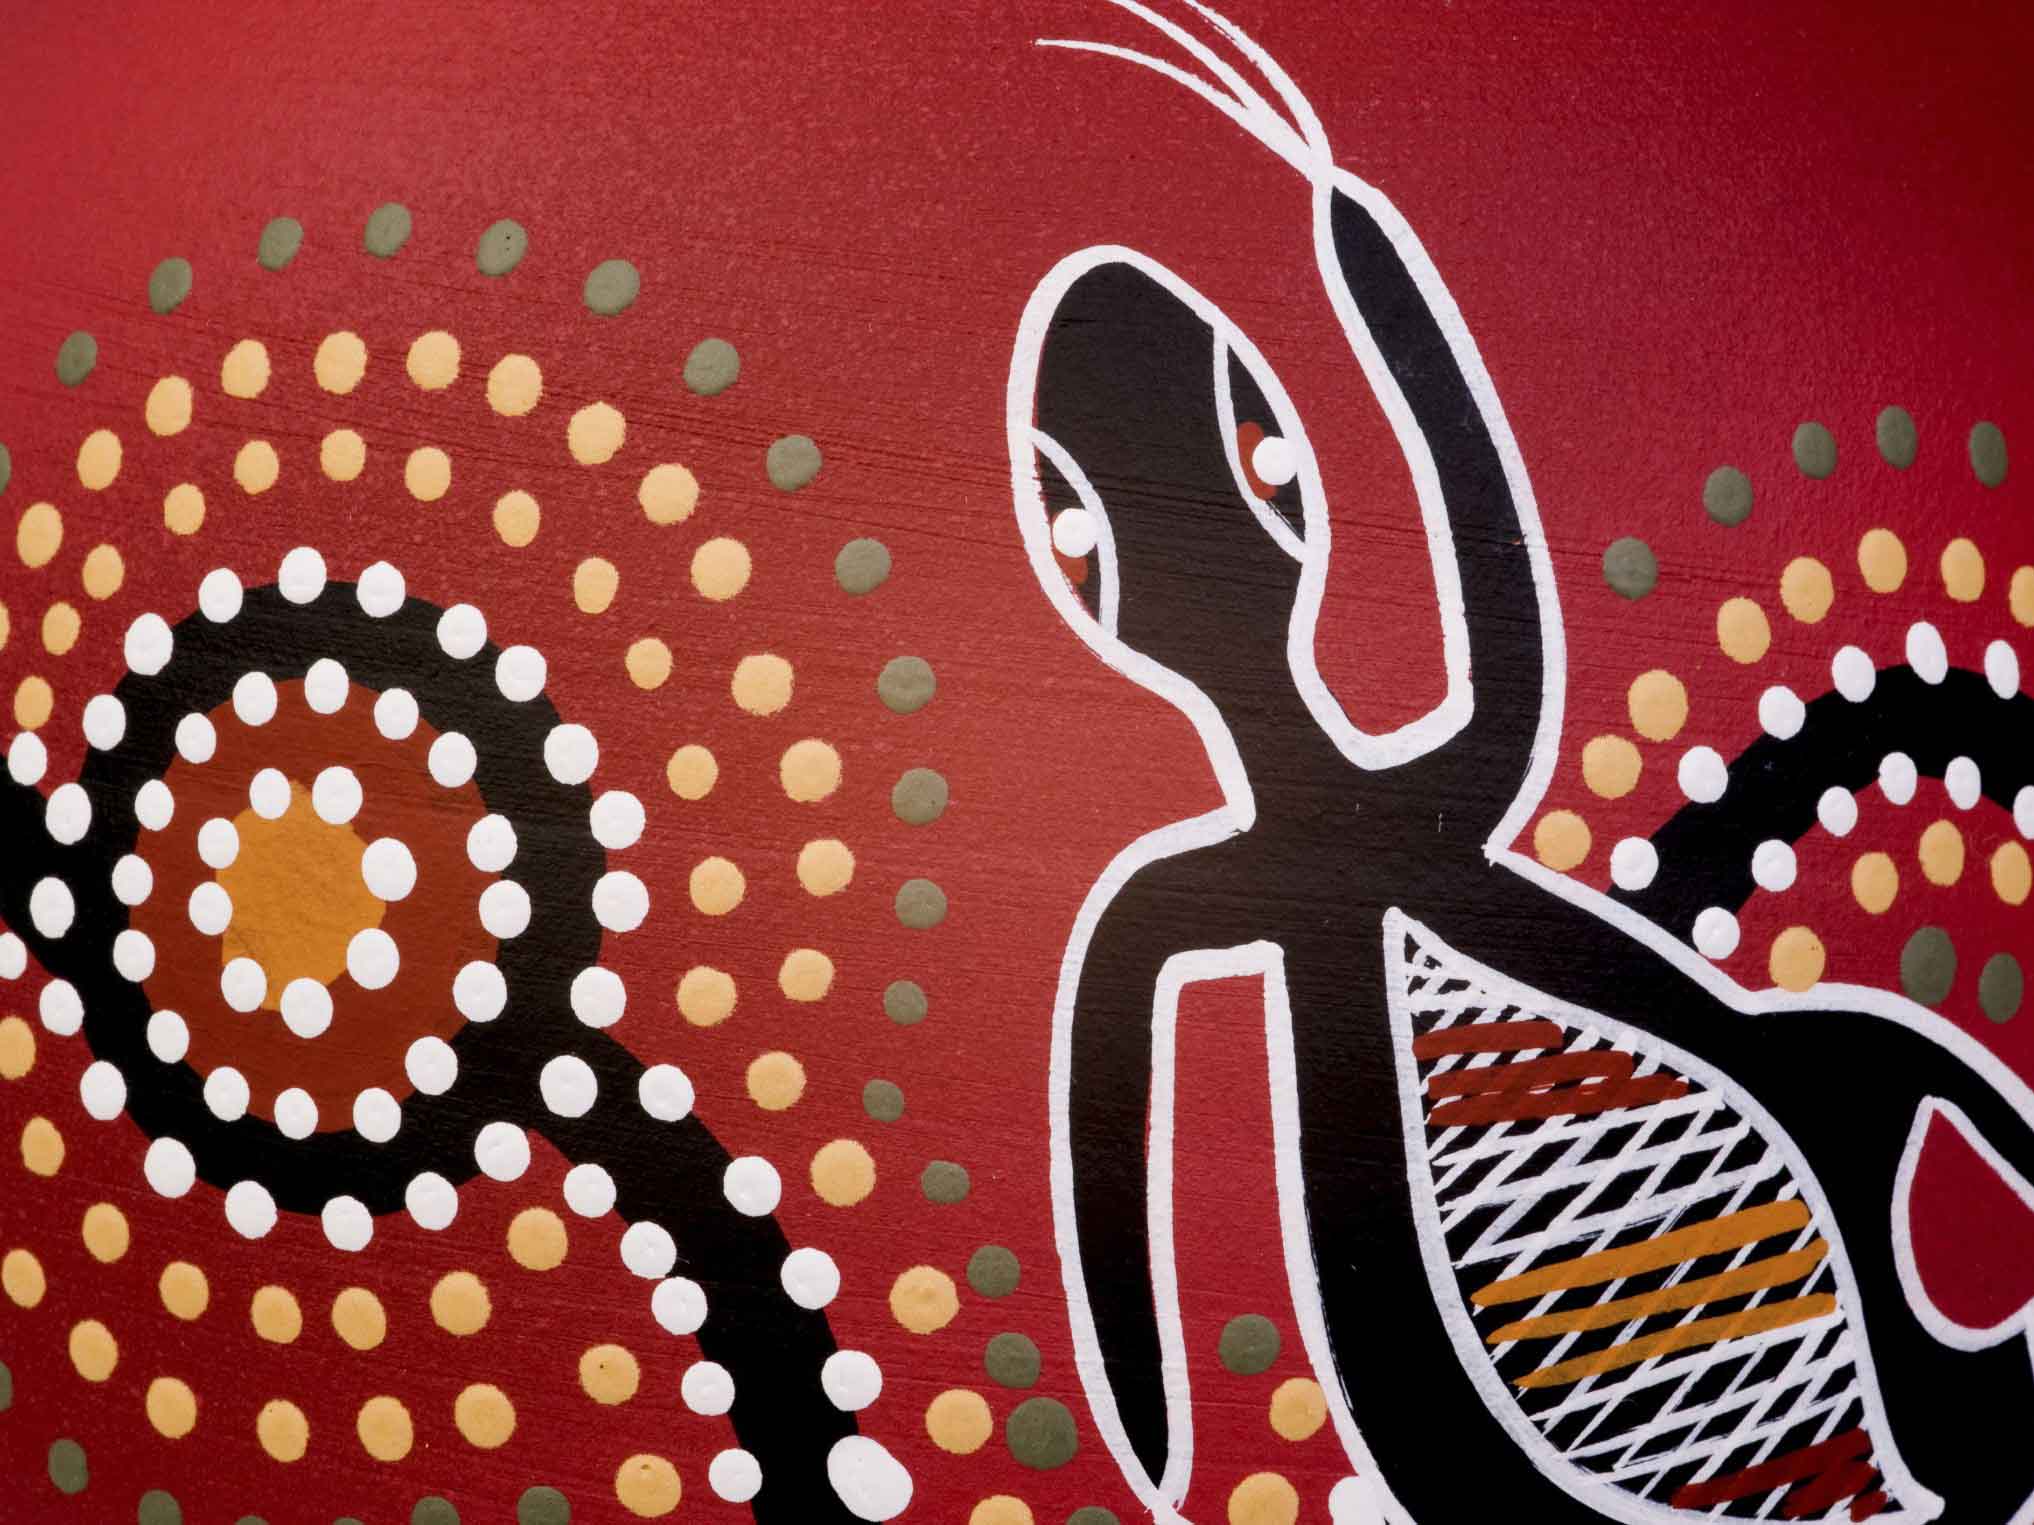 Confusion as indigenous cultural heritage “Last Man Standing Rule” thrown out 